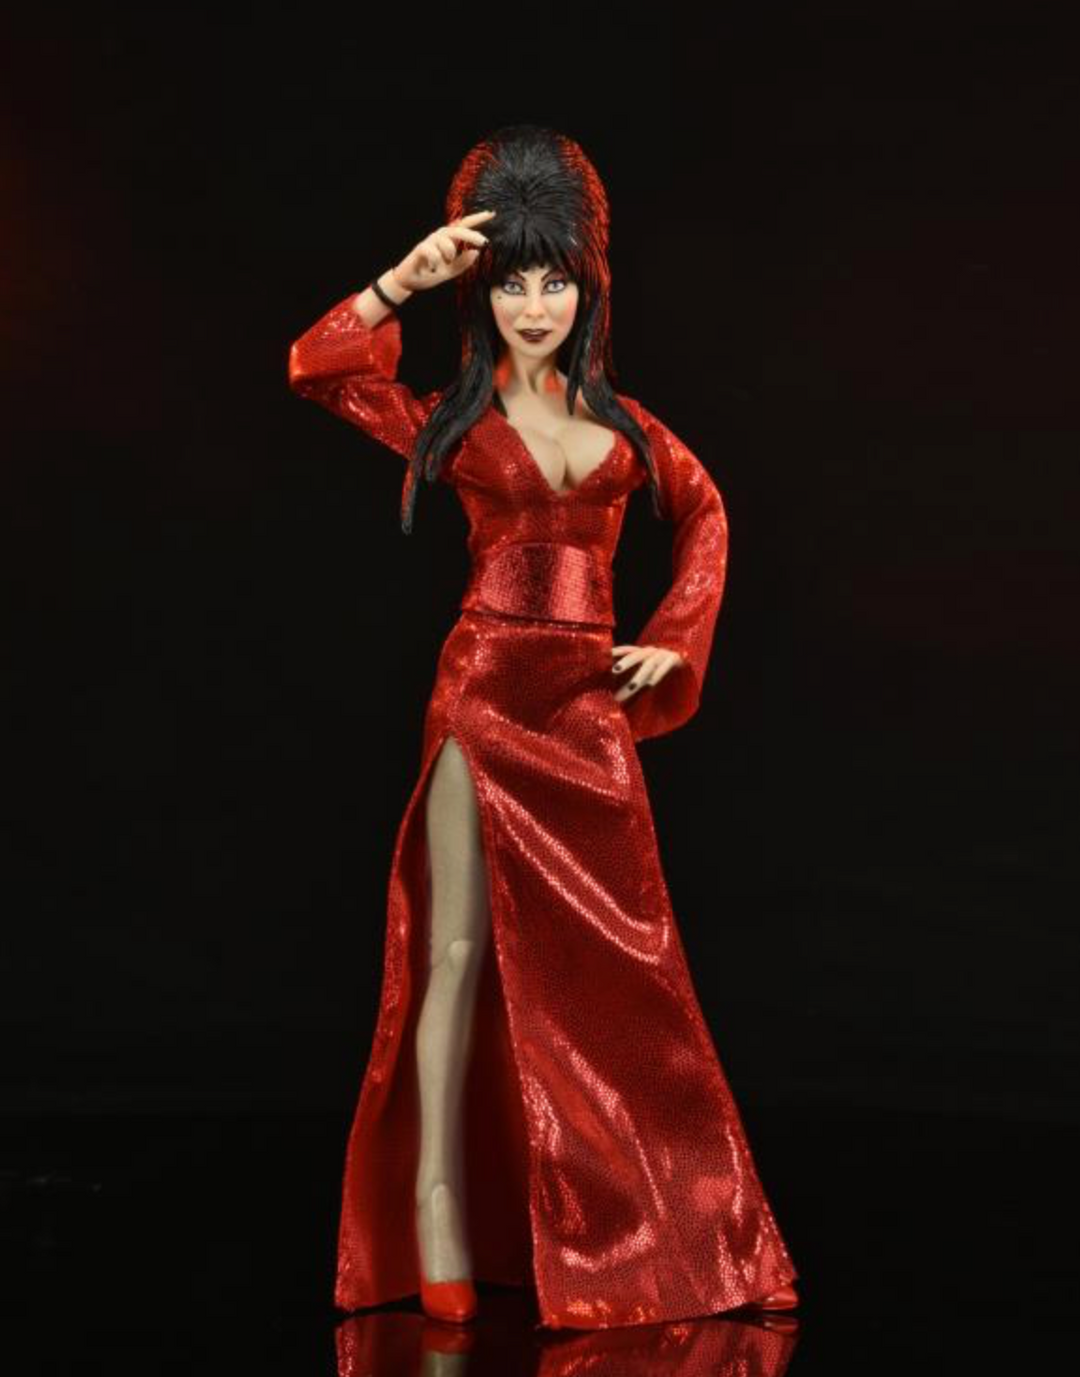 NECA Elvira Mistress of the Dark (Red, Fright, and Boo) Clothed 8" Action Figure